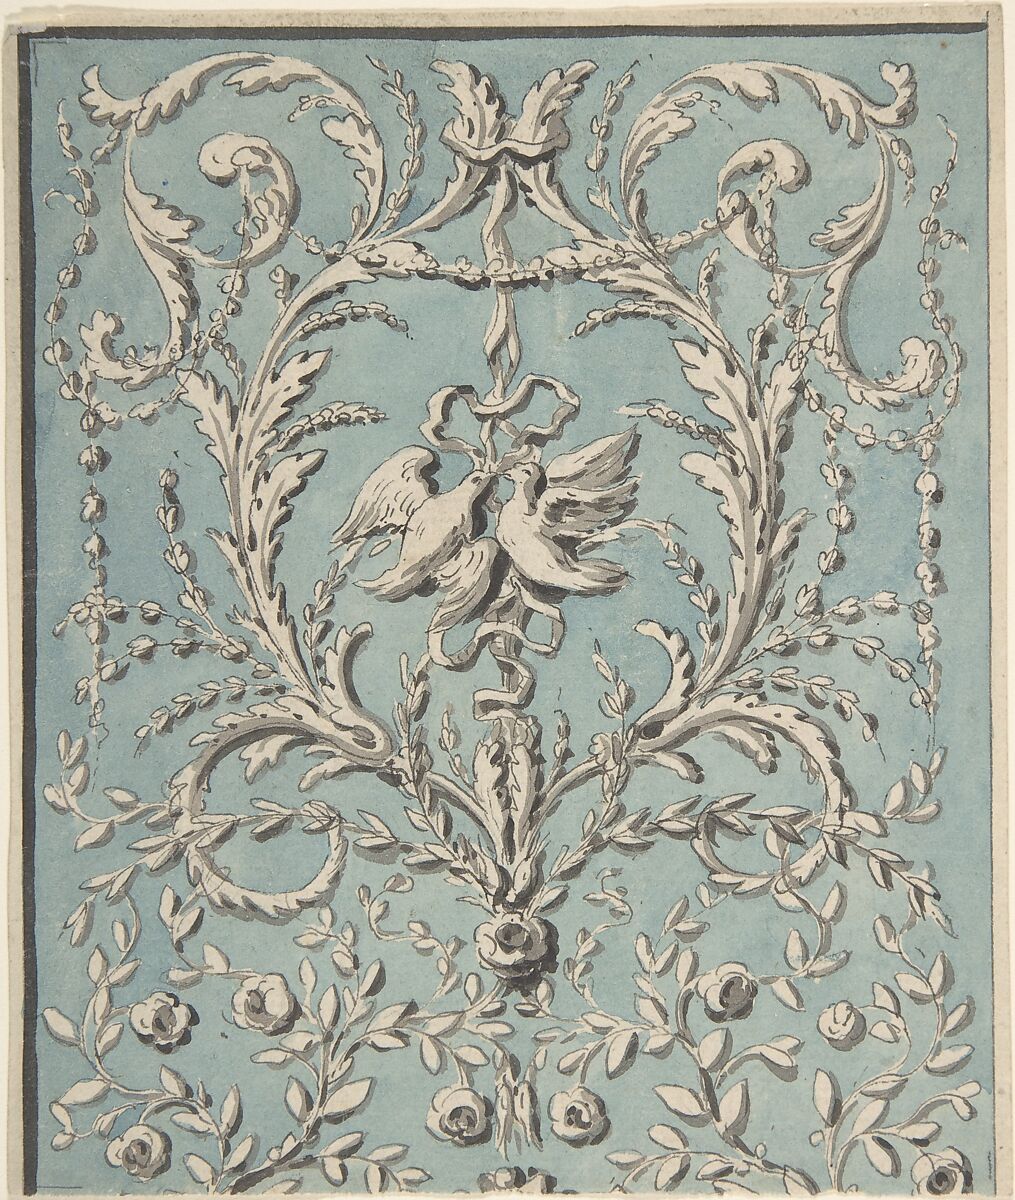 Design for Upright Decorative Panels, Anonymous, French, 18th century, Pen and gray ink, brush and gray wash with background in brush and blue wash. Cut at the bottom. 